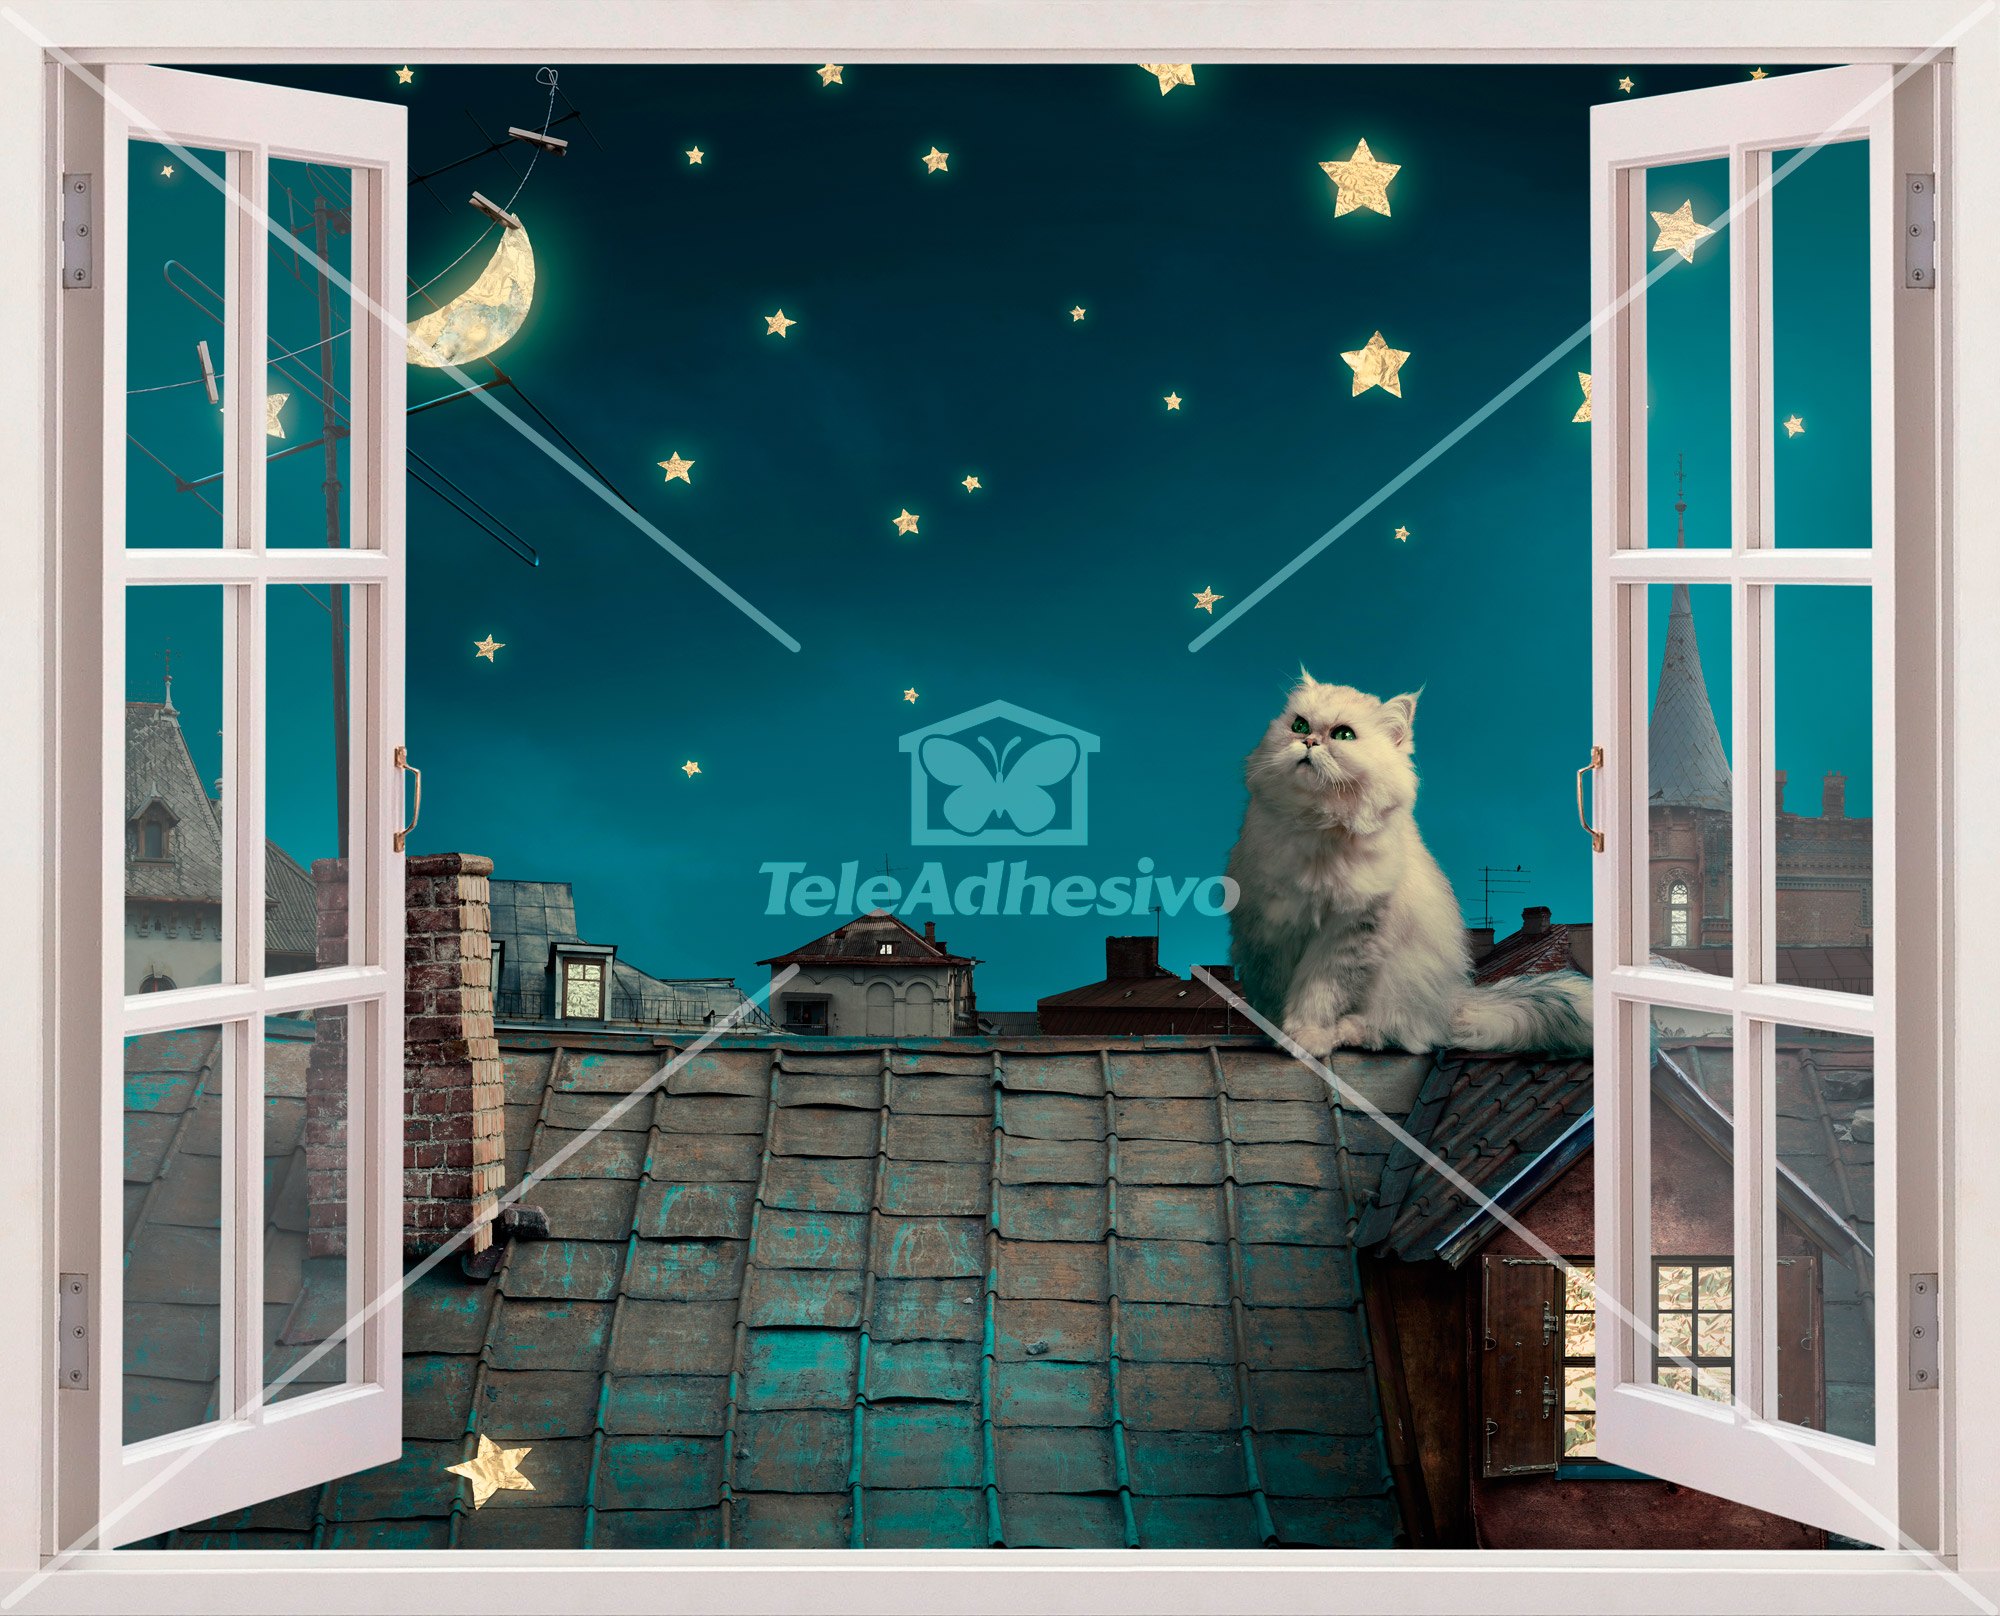 Wall Stickers: A cat on the roof